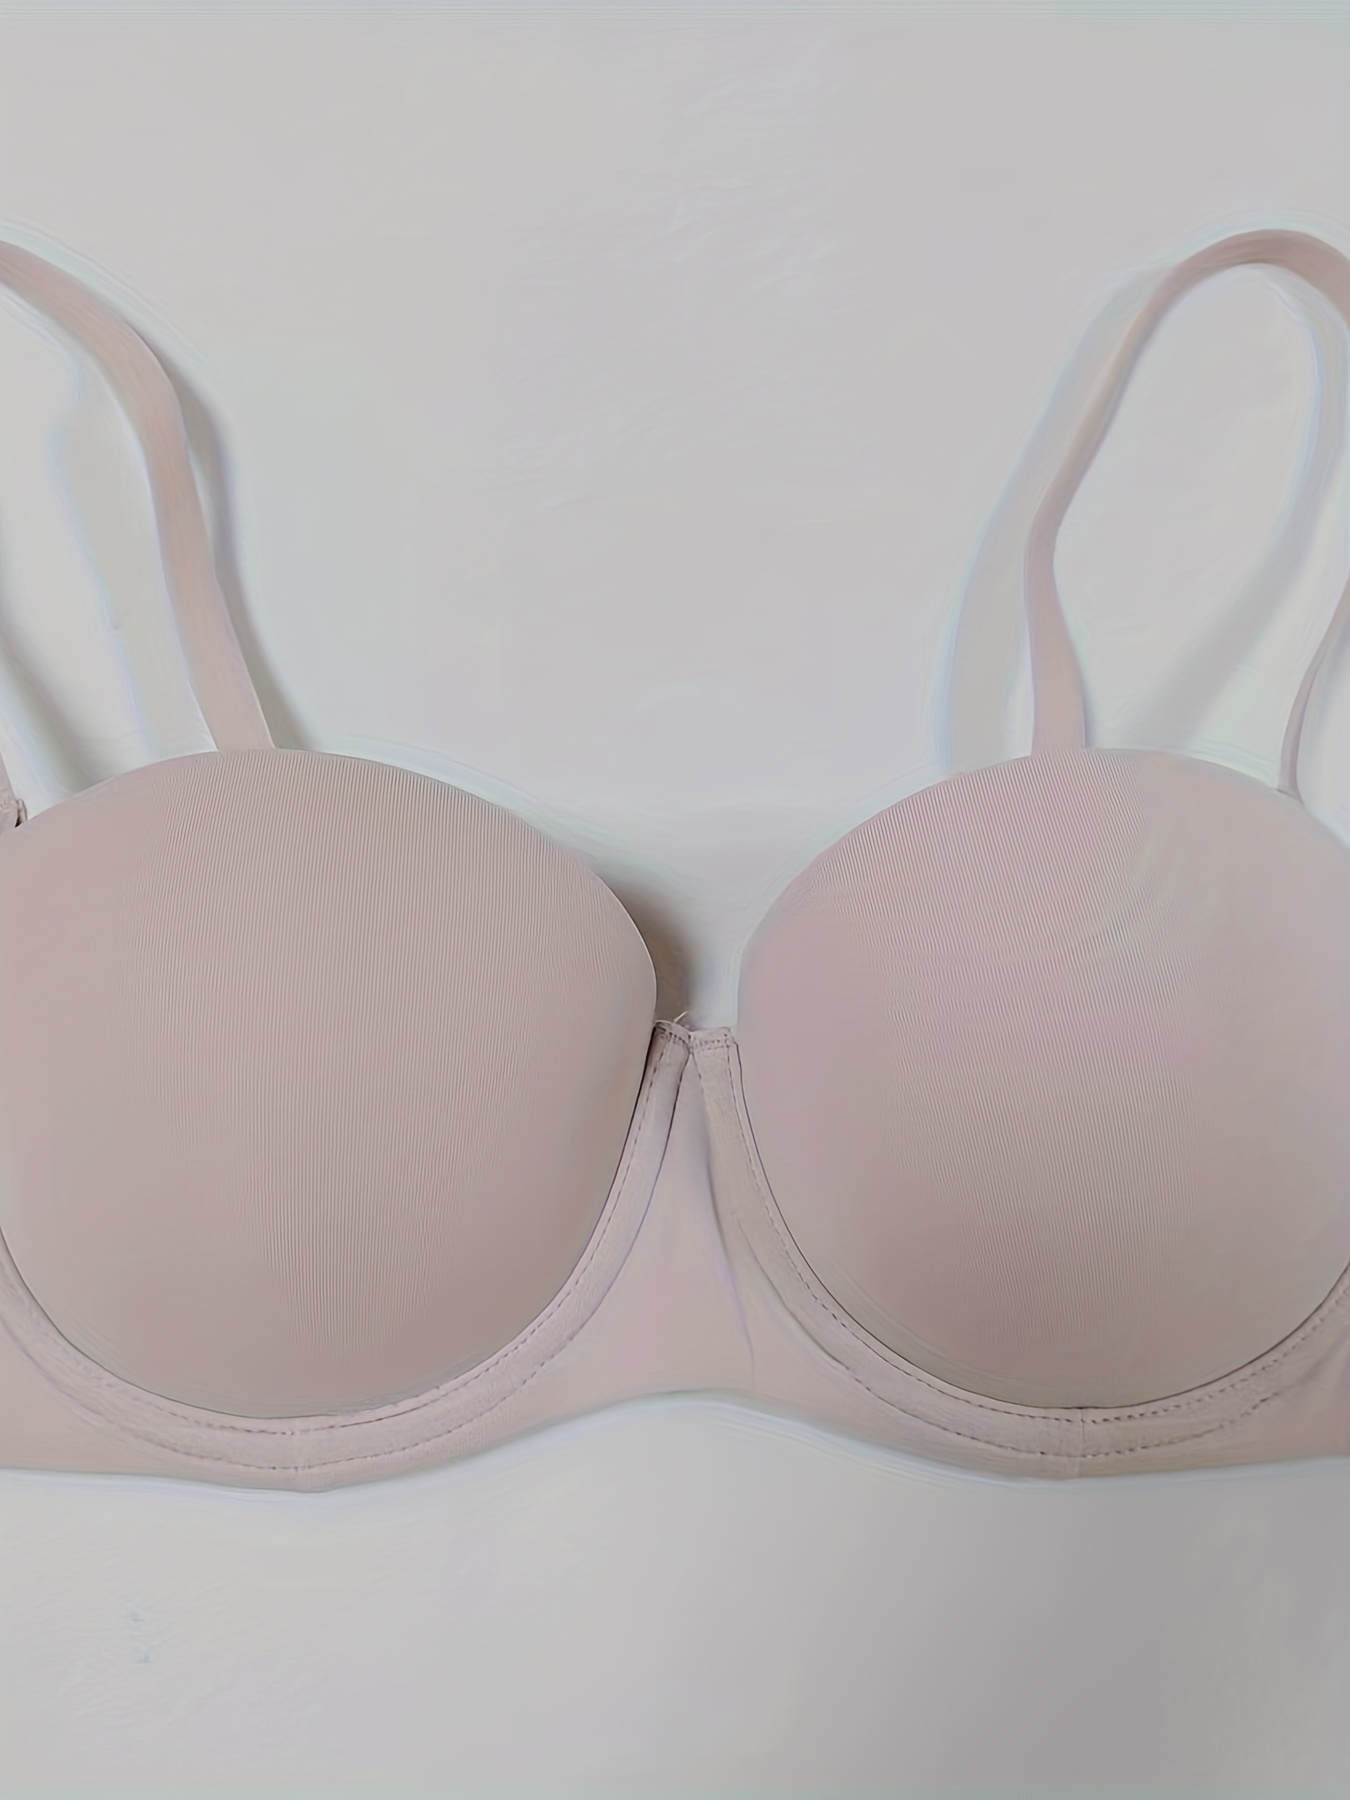 Victoria's Secret Pink Wear Everywhere Strapless Push Up Bra, Padded Bra,  Adjustable Straps, Strapless Bras for Women, Beige (32A) at  Women's  Clothing store